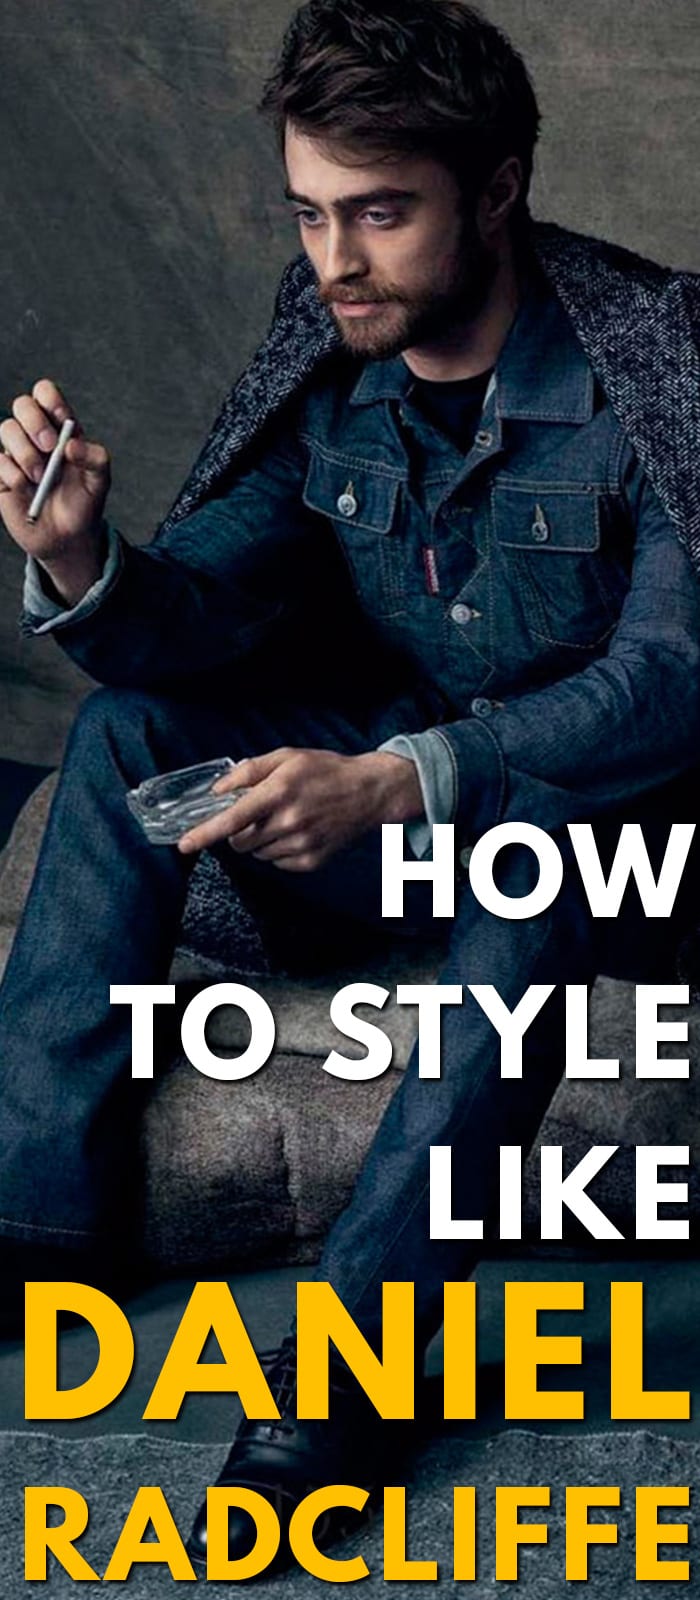 How To Style Like Daniel Radcliffe